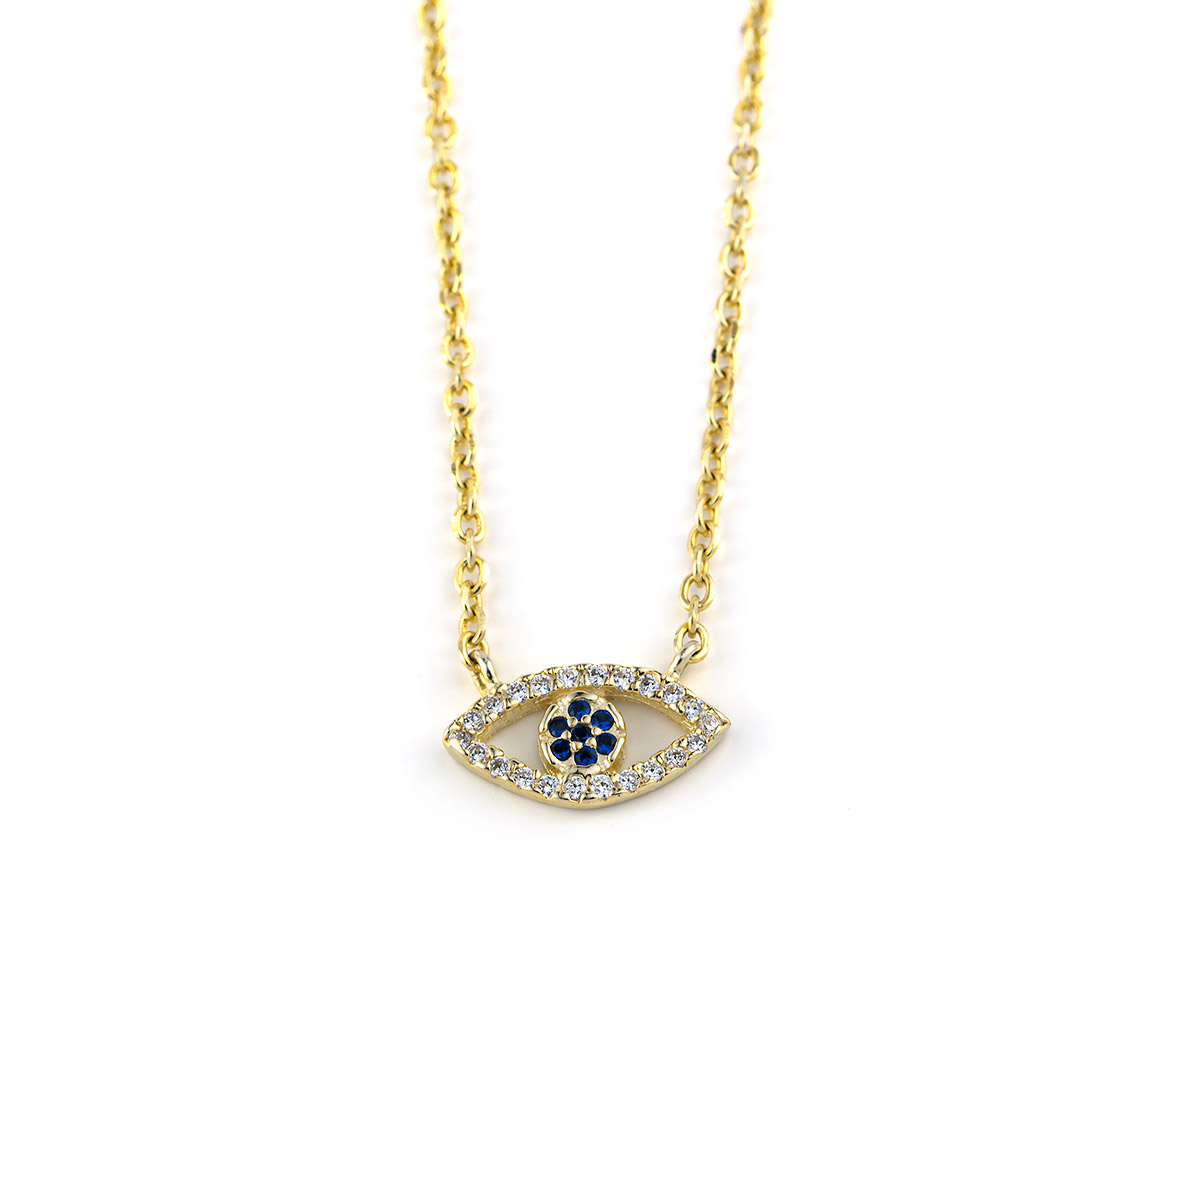 Evil Eye Necklace - Sterling Silver Gold Plated with Zircon